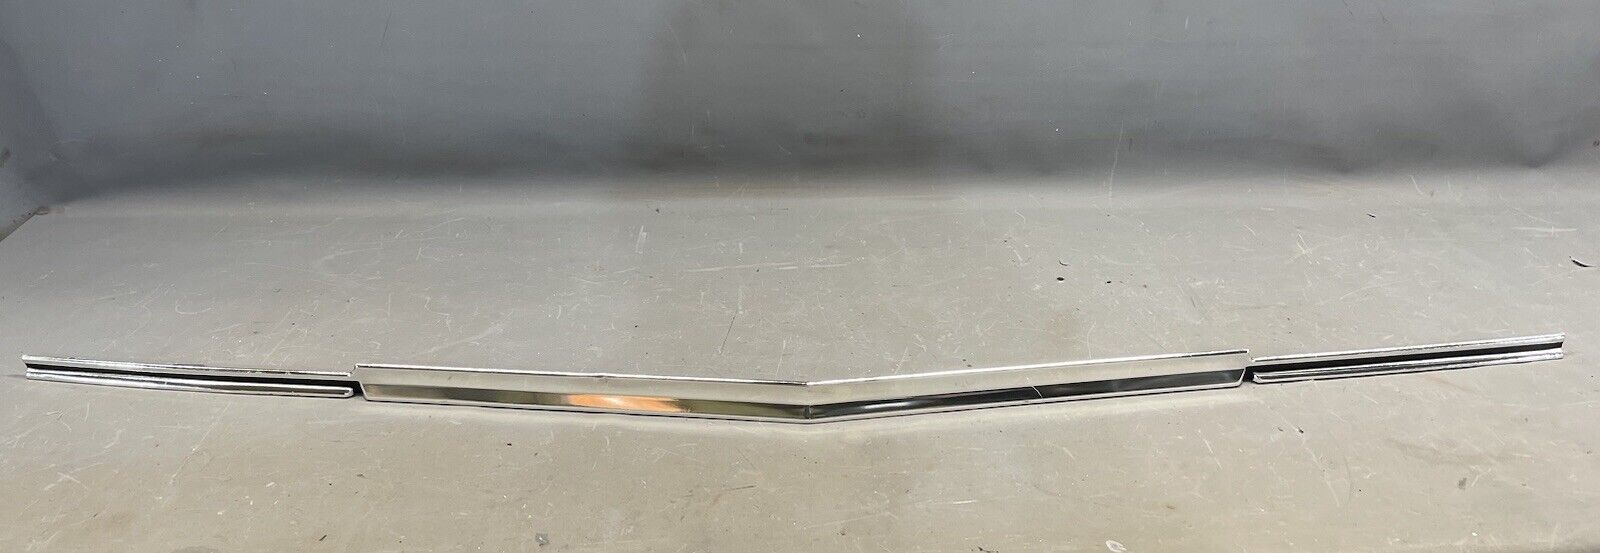 NOS 1977 1978 Chevy Impala Caprice Classic Header Grille Panel Trim Hood Molding